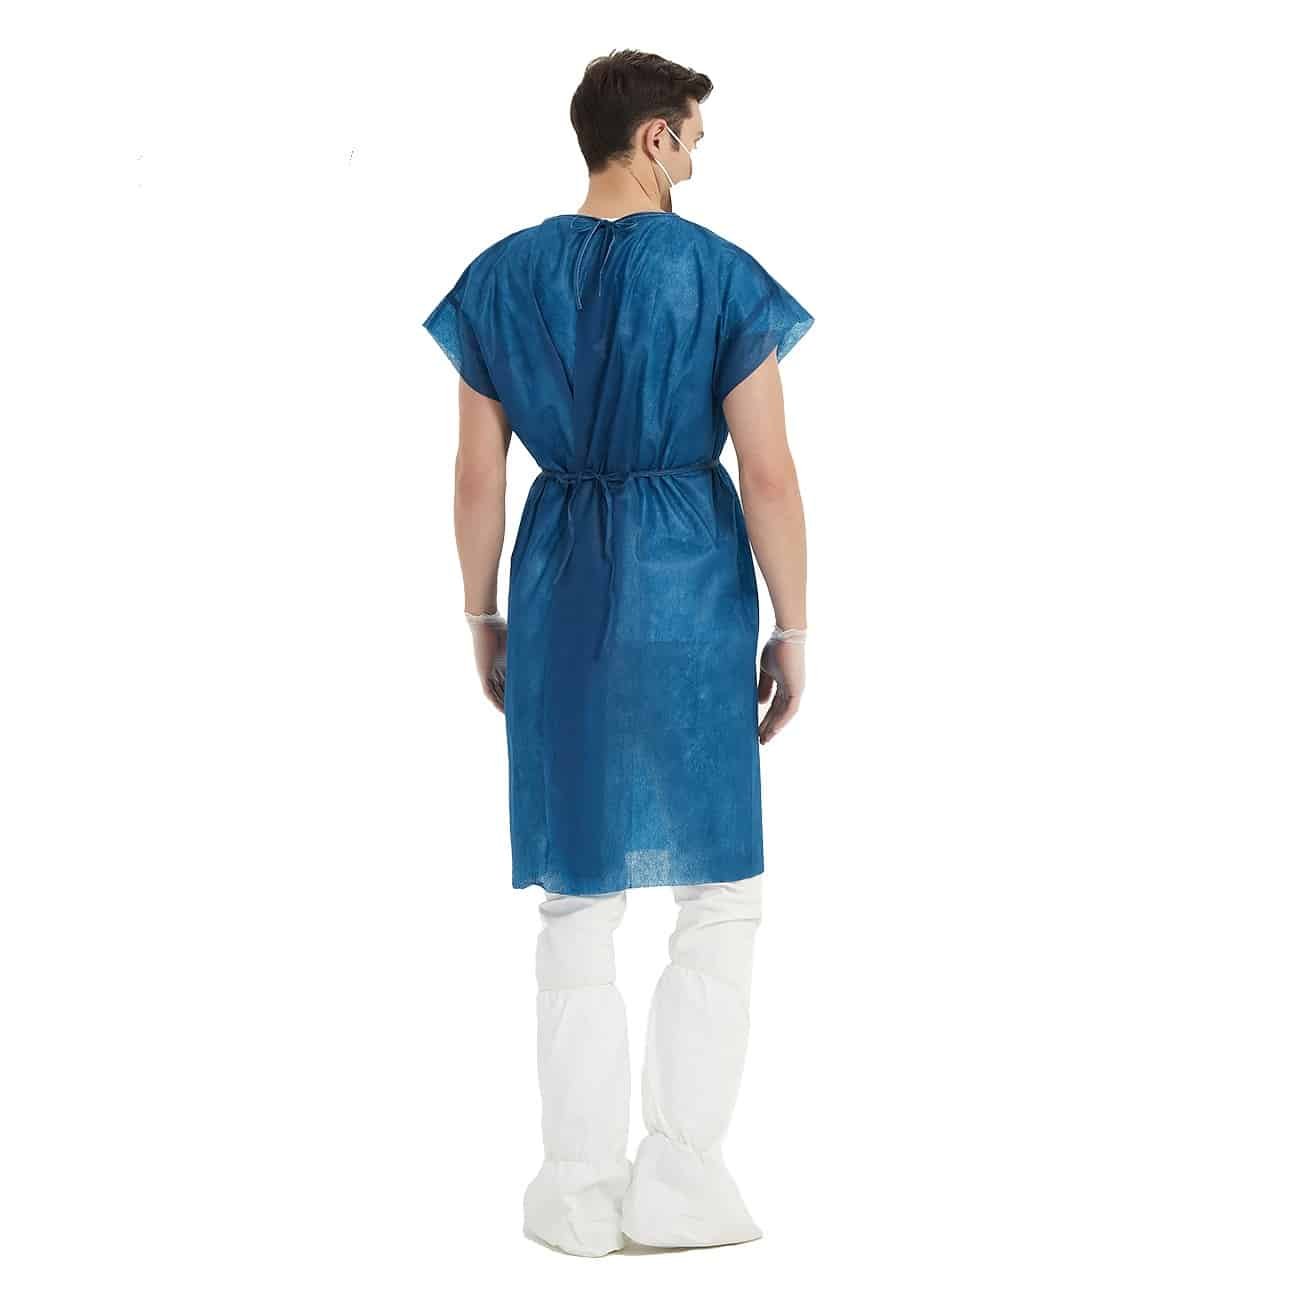 REA COMPANY Patient Gowns Combo 5 Disposable Isolation Gowns + 10 Shoe  Covers + 5 Bouffant Caps Medical Gowns American Company Mammogram Gown Lab Gowns  Hospital Gowns for Women and Men PPE